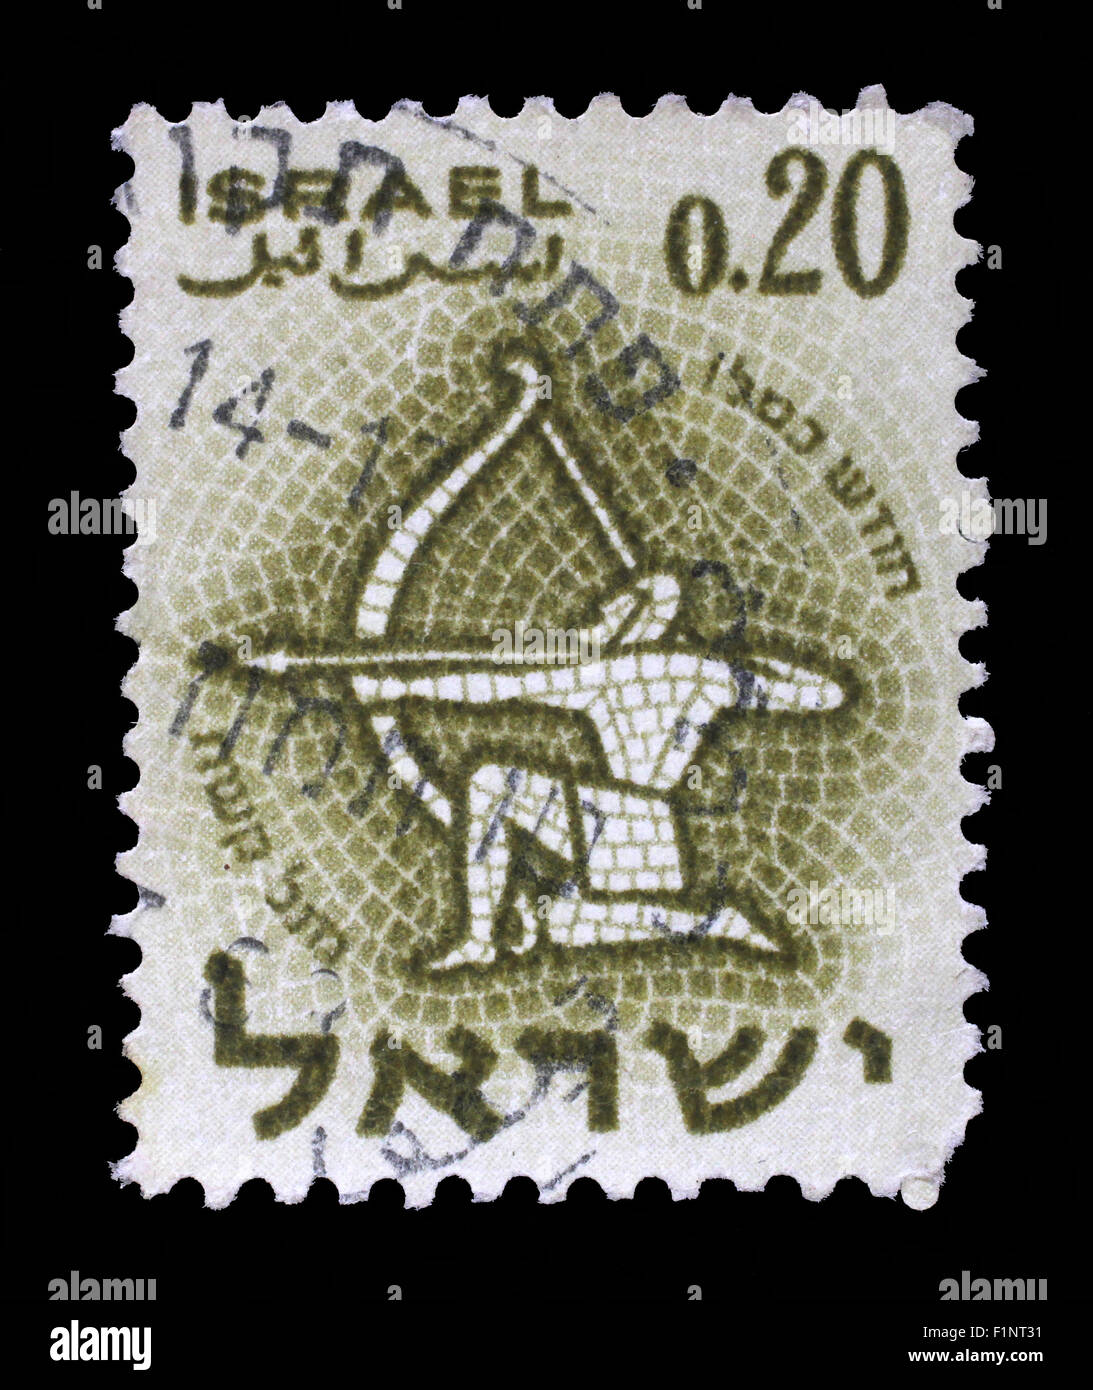 Stamp printed in the Israel, shows sign of the zodiac Sagittarius, circa 1961 Stock Photo